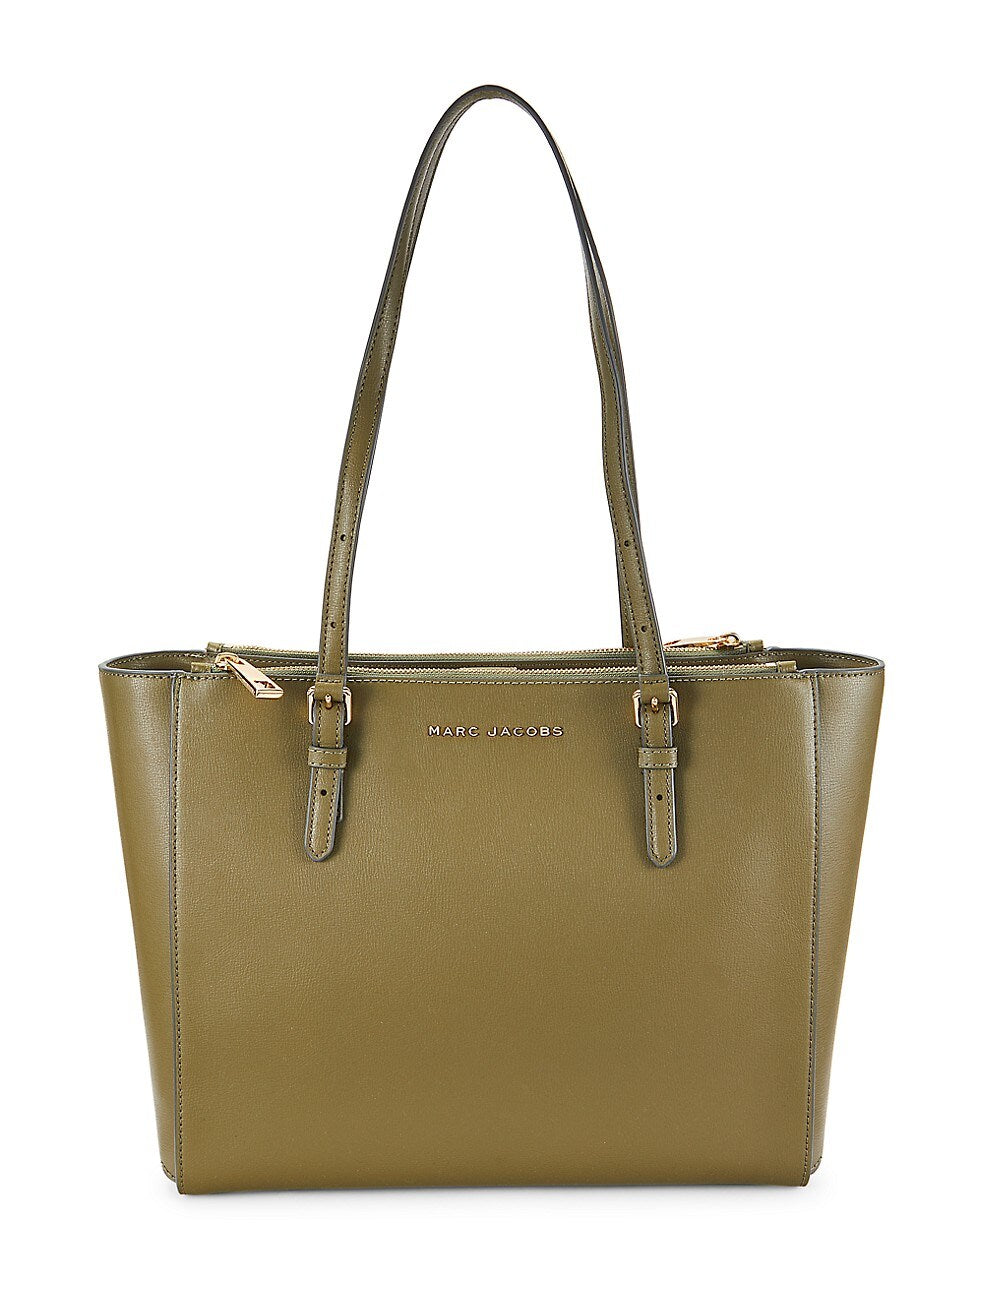 Marc Jacobs Commuter Leather Tote - Martini Olive